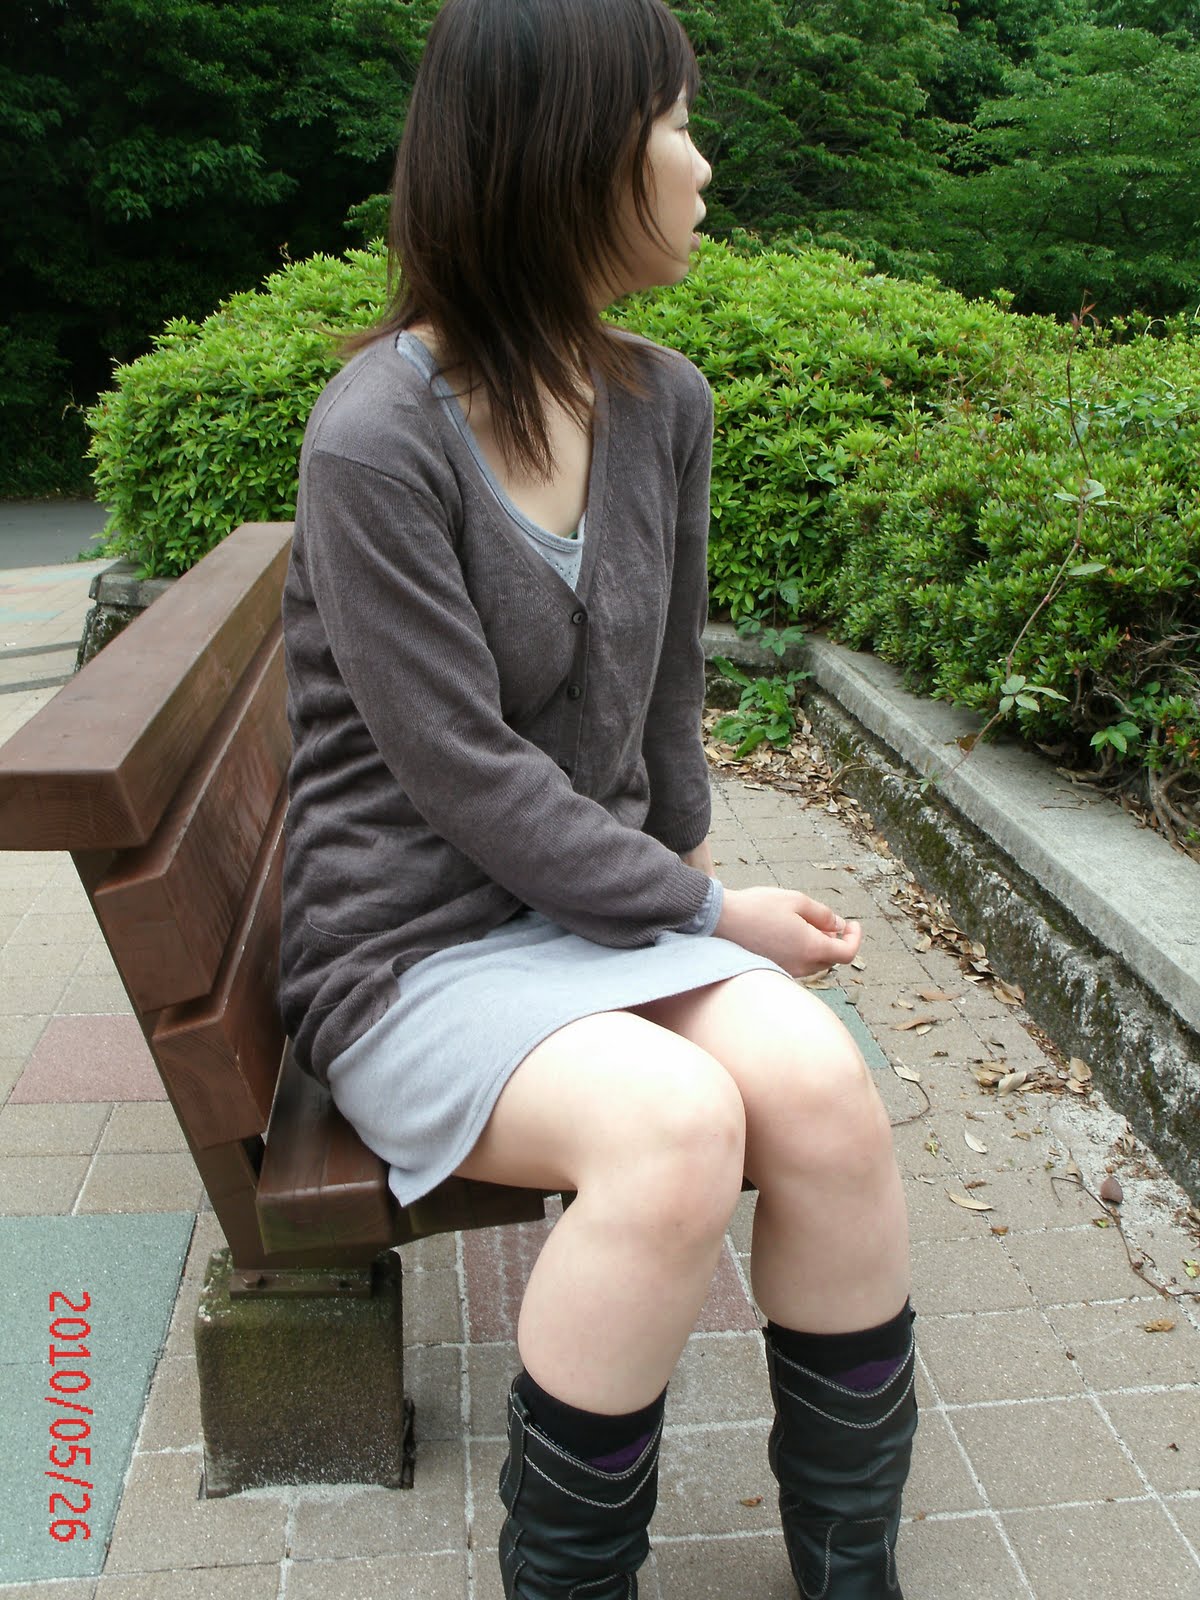 1200px x 1600px - Japanese exhibitionist at the park (lots of pussy closeups) - Teens In Asia